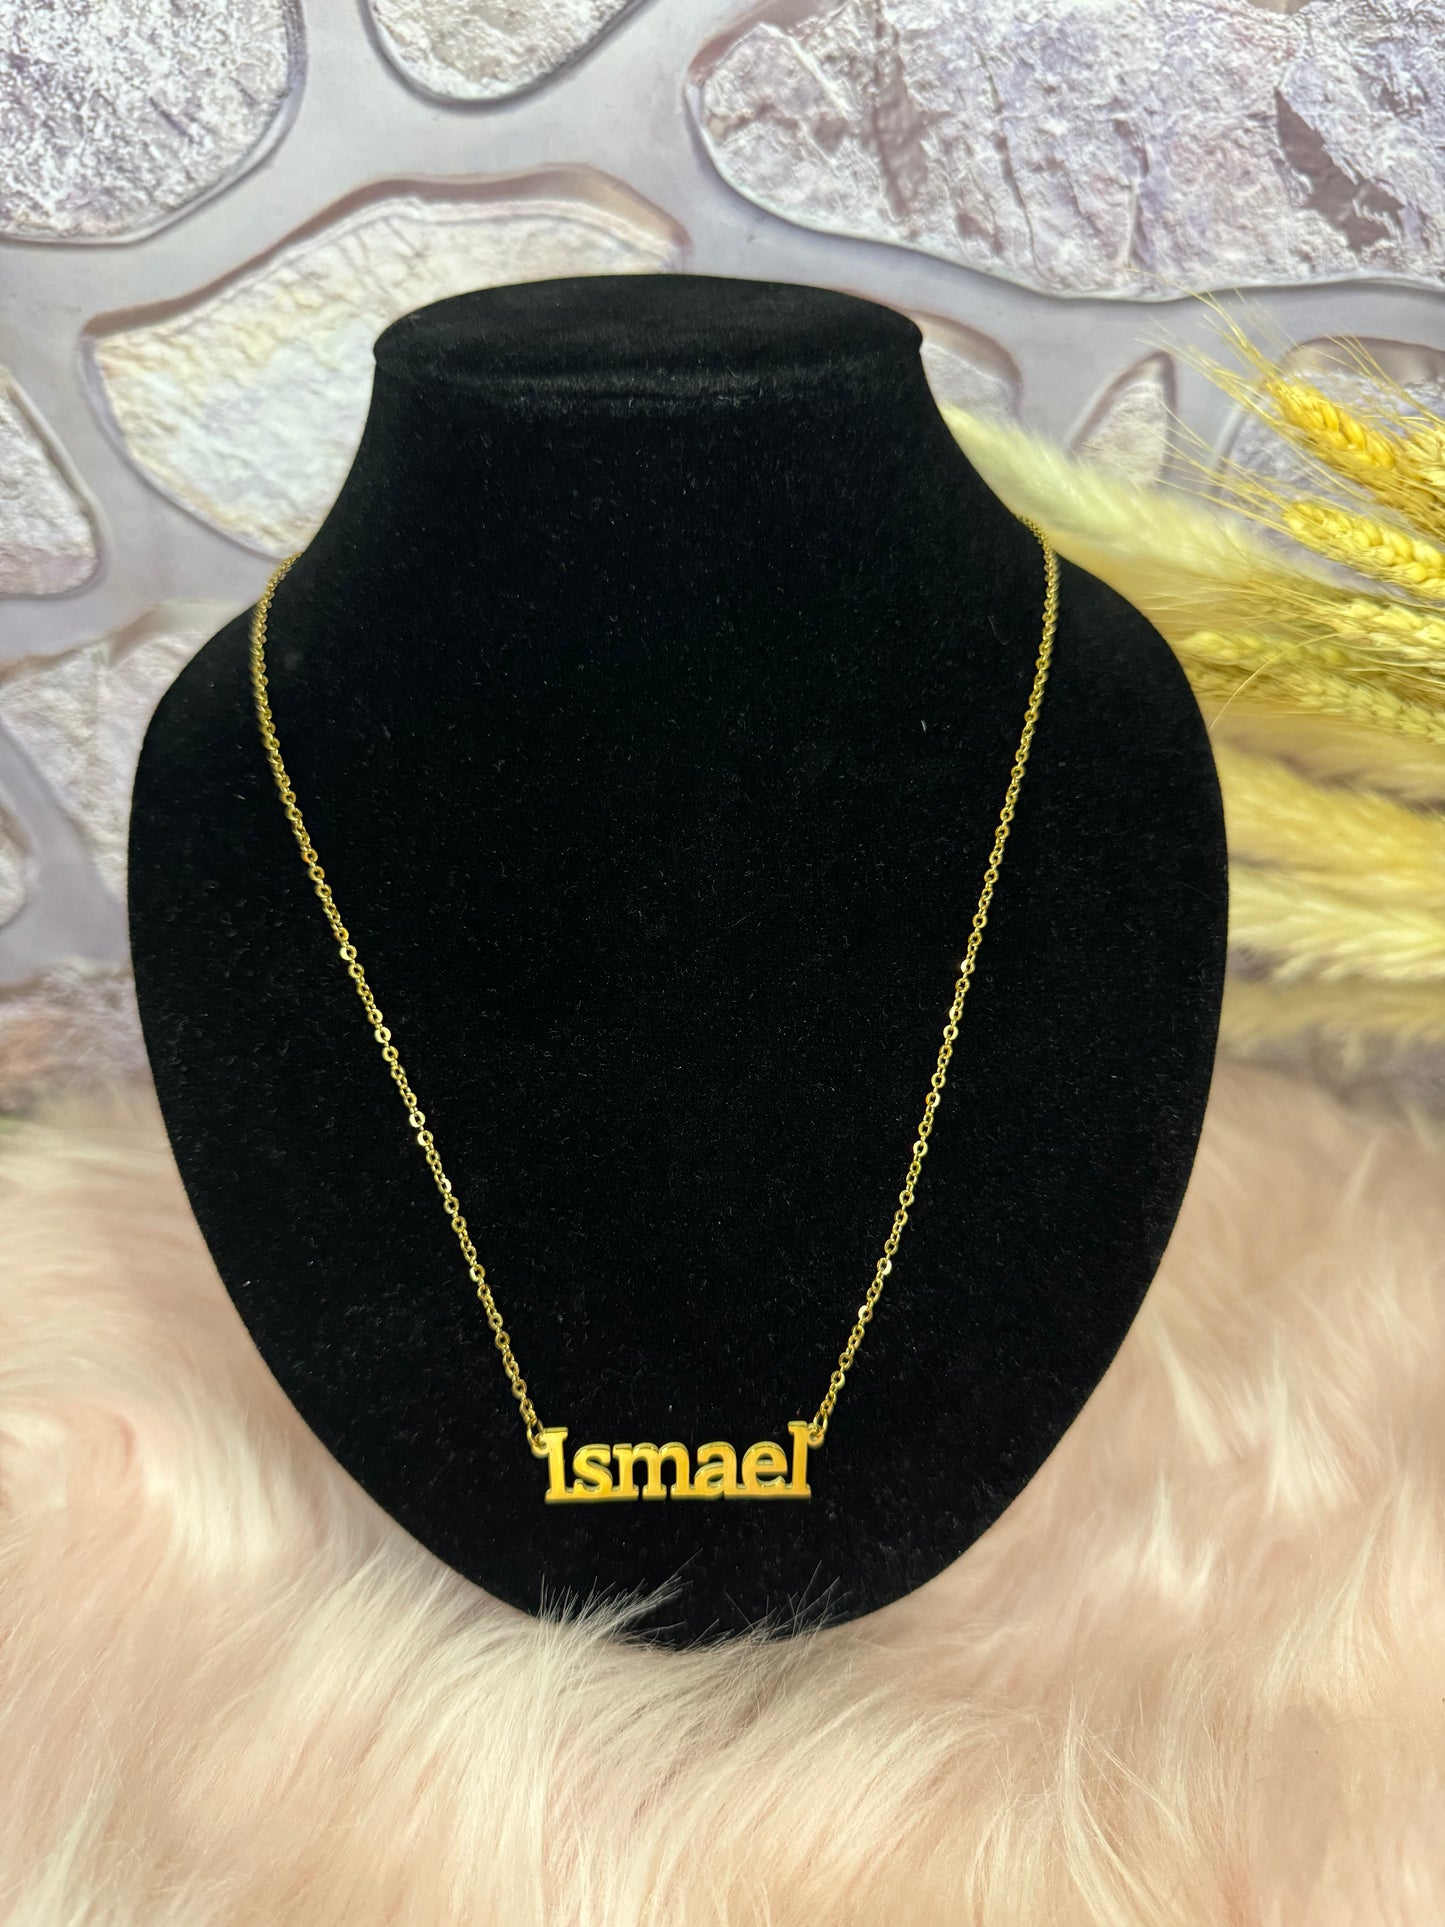 Ismael  instock name necklace - stainless steel gold plated